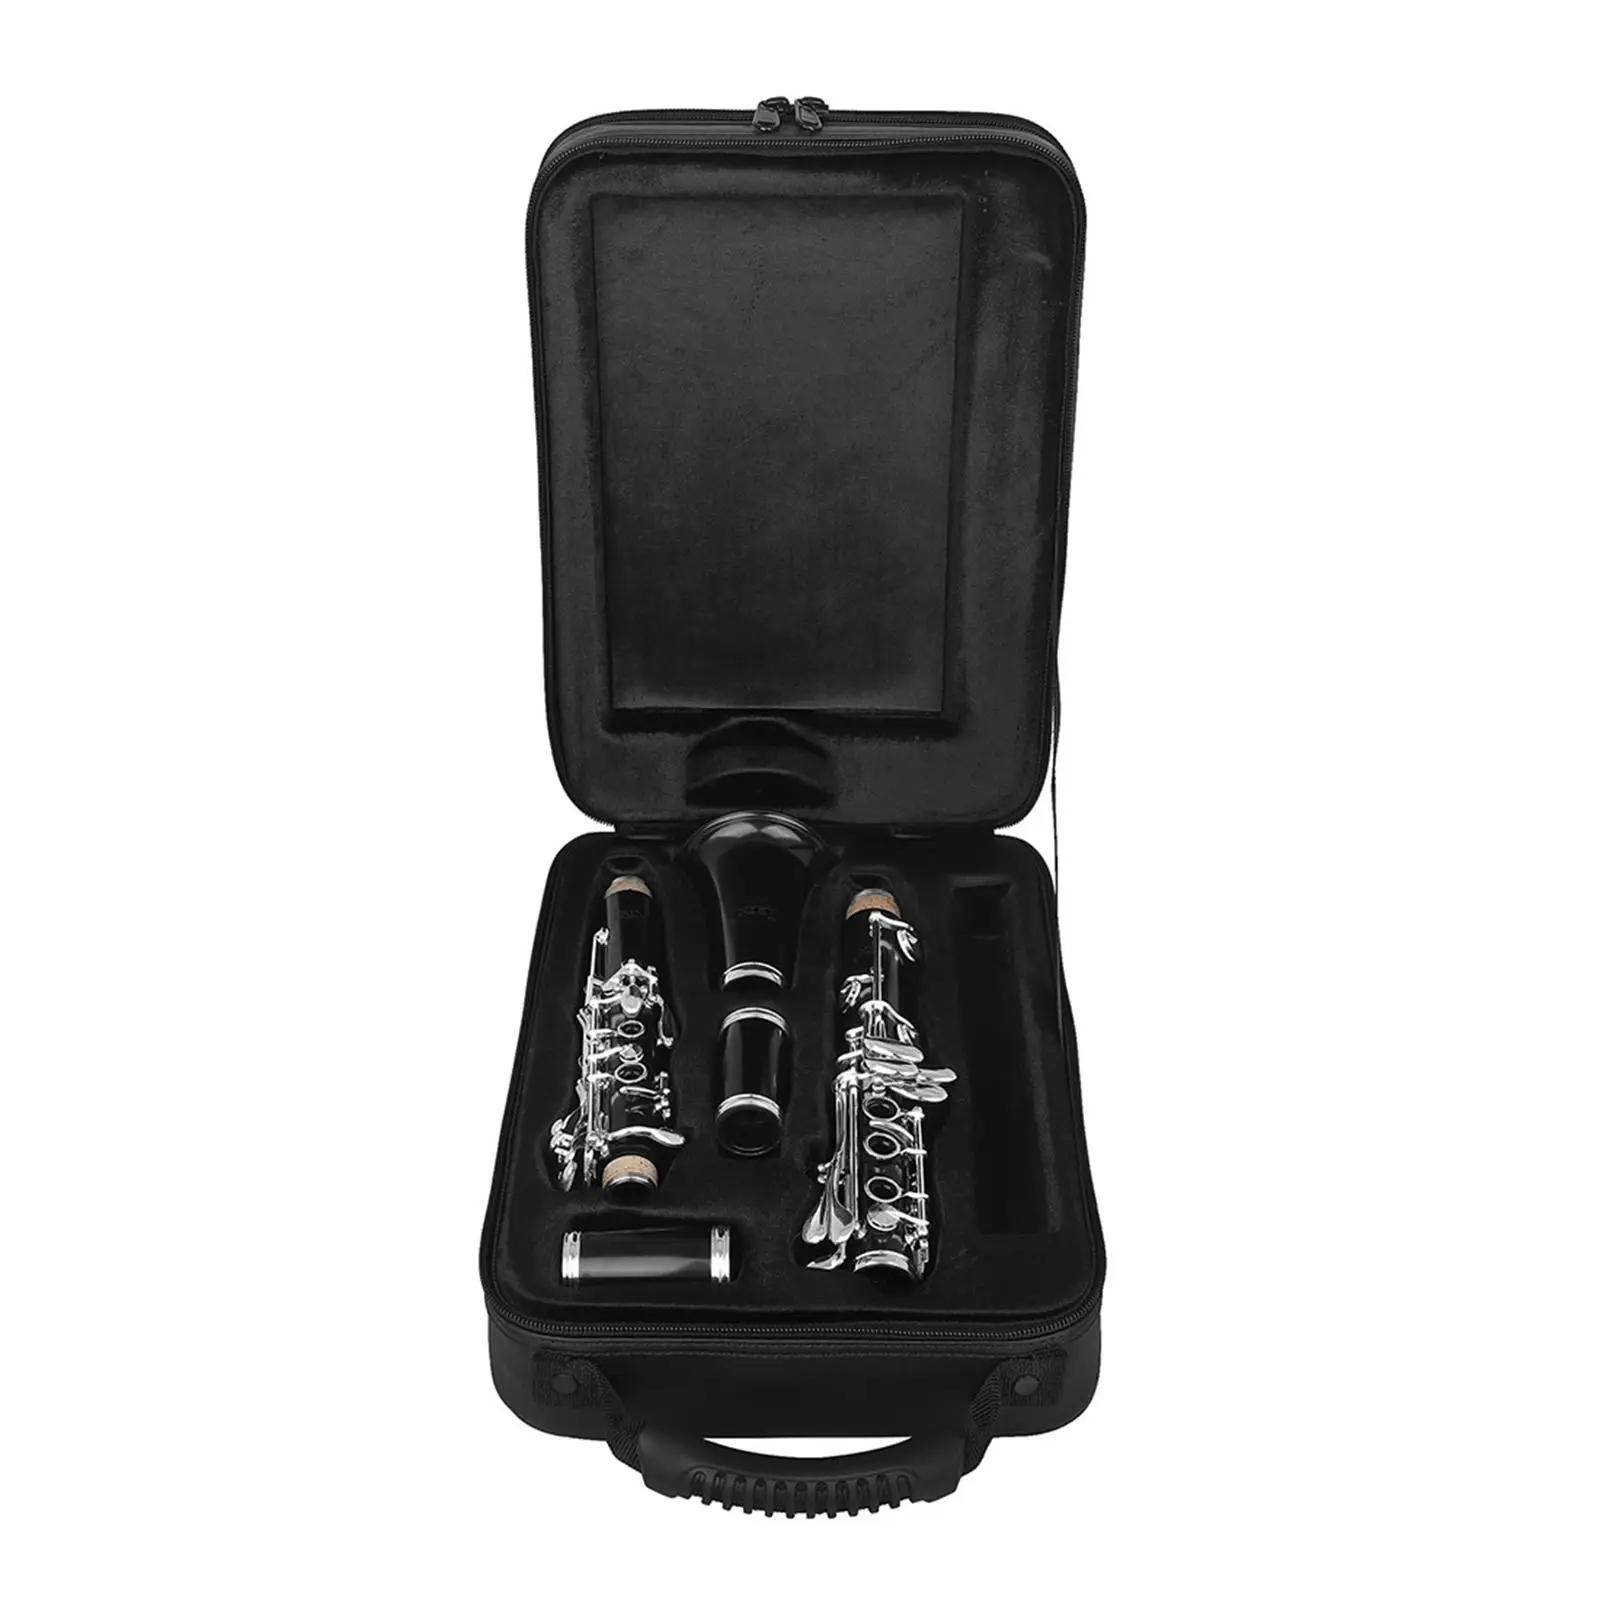 Clarinet Case PU Leather Lightweight Clarinet Gig Bag for Travel Outdoor